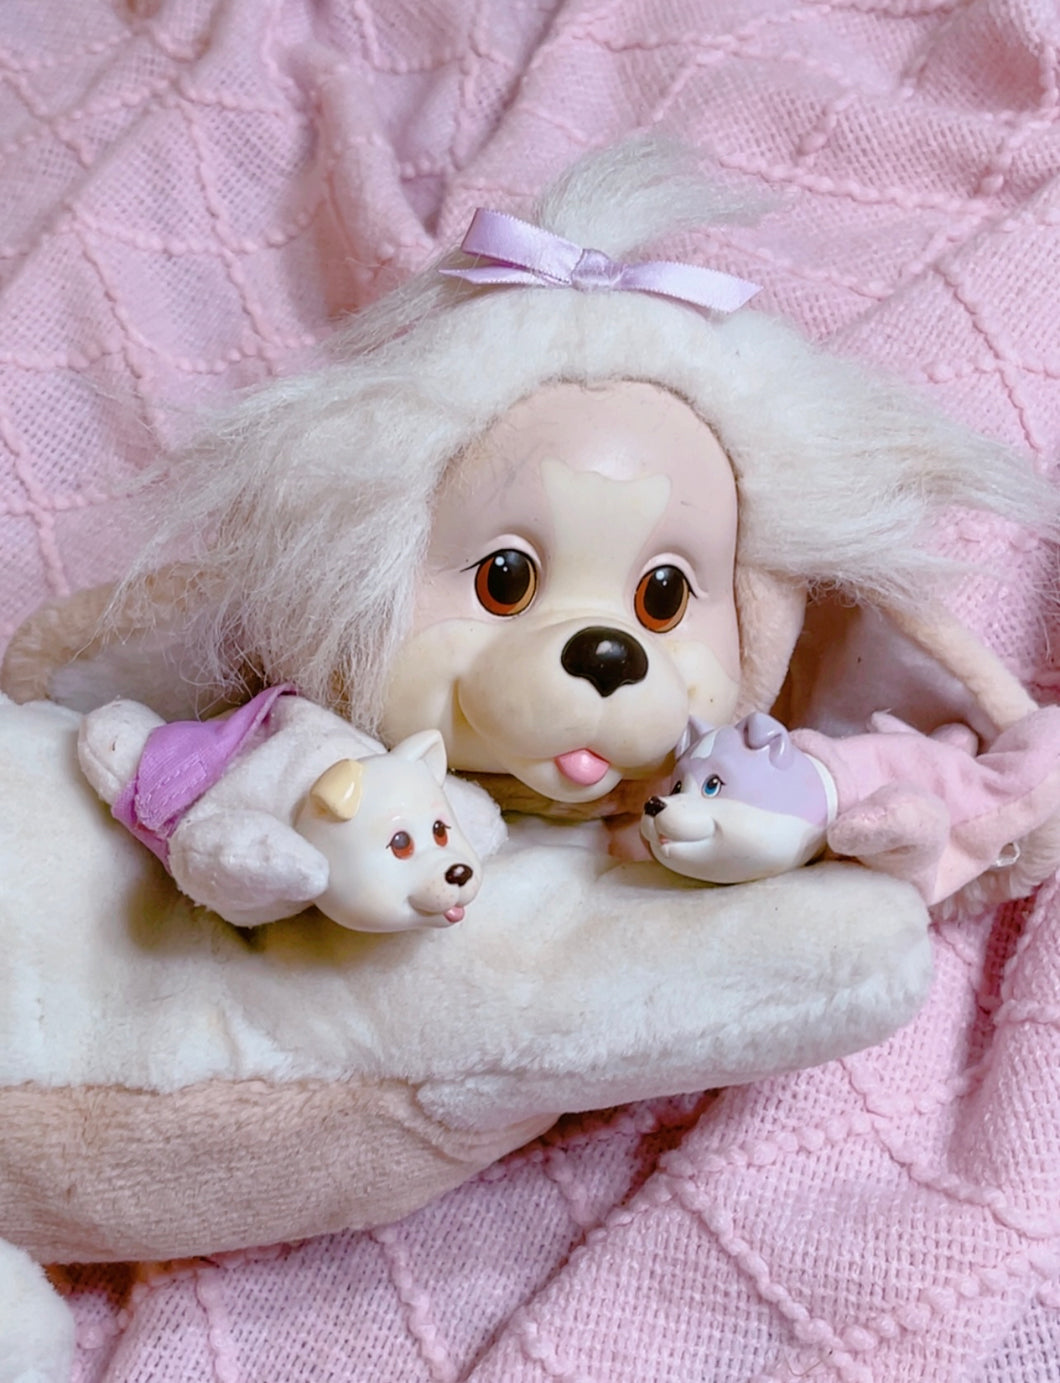 1991 VINTAGE Puppy Surprise toy - 2 puppies! 13” long